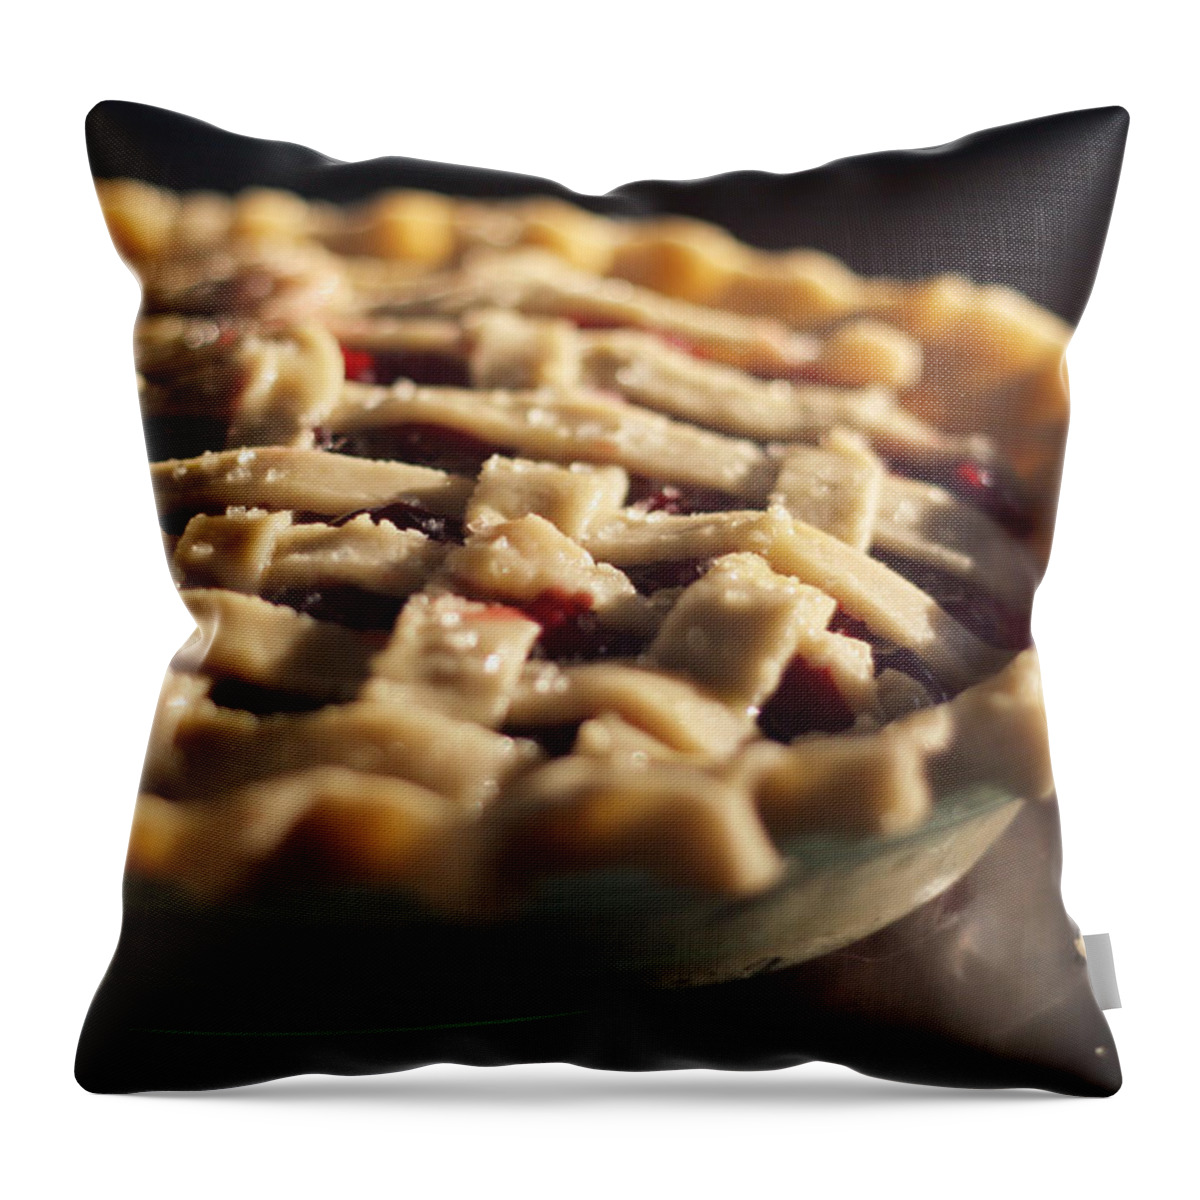 Close-up Throw Pillow featuring the photograph Unbaked Cherry Pie With Lattice Crust by Photograph By Sarah Orsag